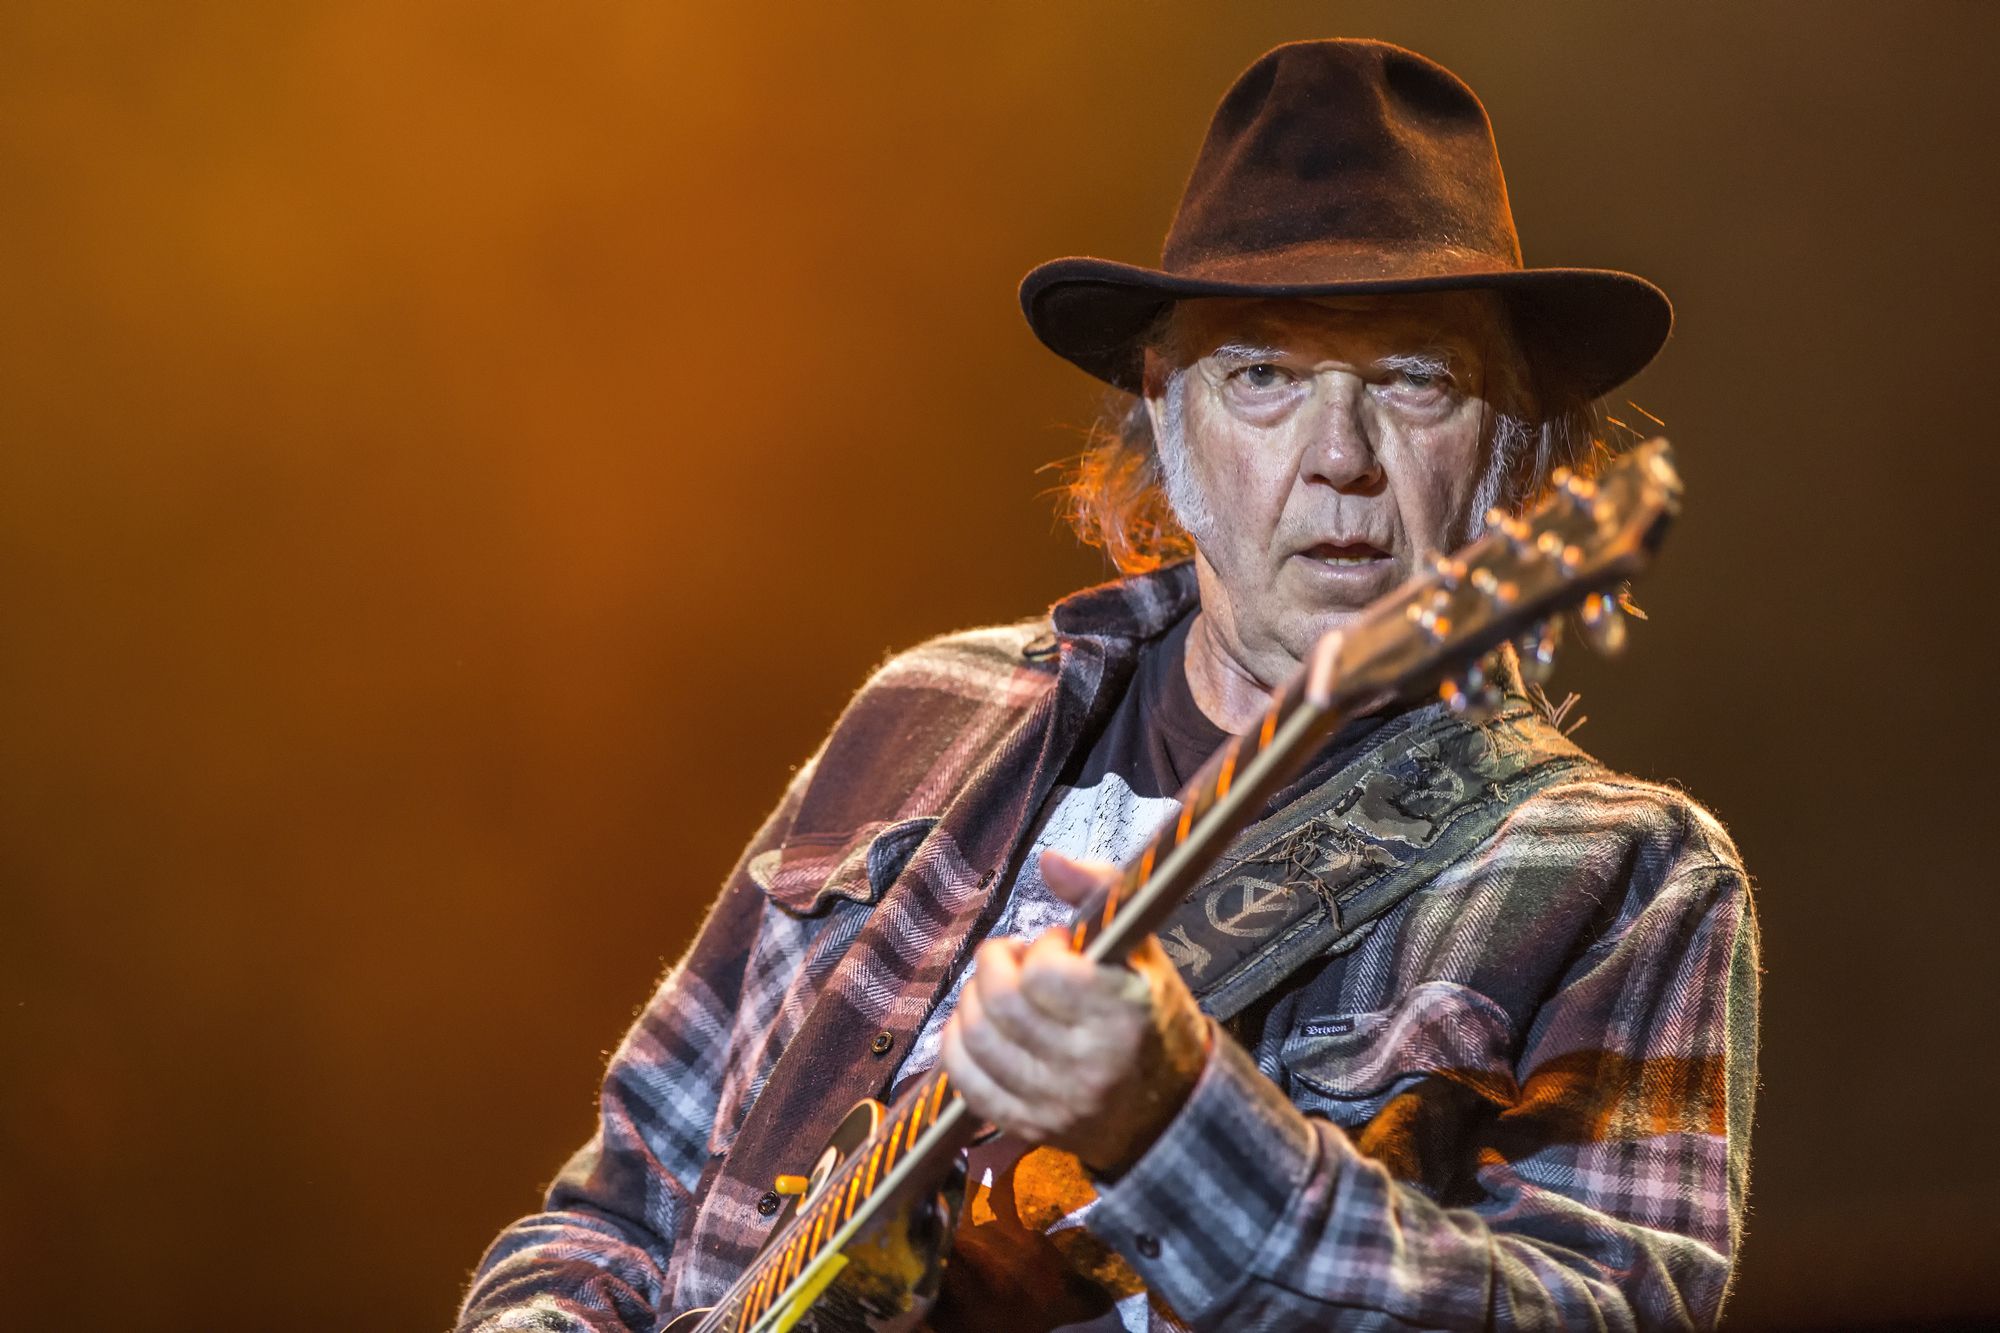 <p>Neil Young started his recording career in earnest in the 1960s as a member of Buffalo Springfield, and he’s spent the decades since then playing with Crosby, Stills & Nash, performing solo, and using a few different backing bands, such as Promise of the Real and the International Harvesters. His most famous backing band is Crazy Horse, which specializes in nothing so much as hours of howling feedback and distortion that seem designed to scare off Young’s folkie fans who are just there to hear “Sugar Mountain.” <a href="https://neilyoungarchives.com/account?screen=tickets">His current tour with Crazy Horse</a> is in progress and goes through September, and several dates on the tour are already sold out, so buy tickets to see them and wear plenty of hearing protection.</p>